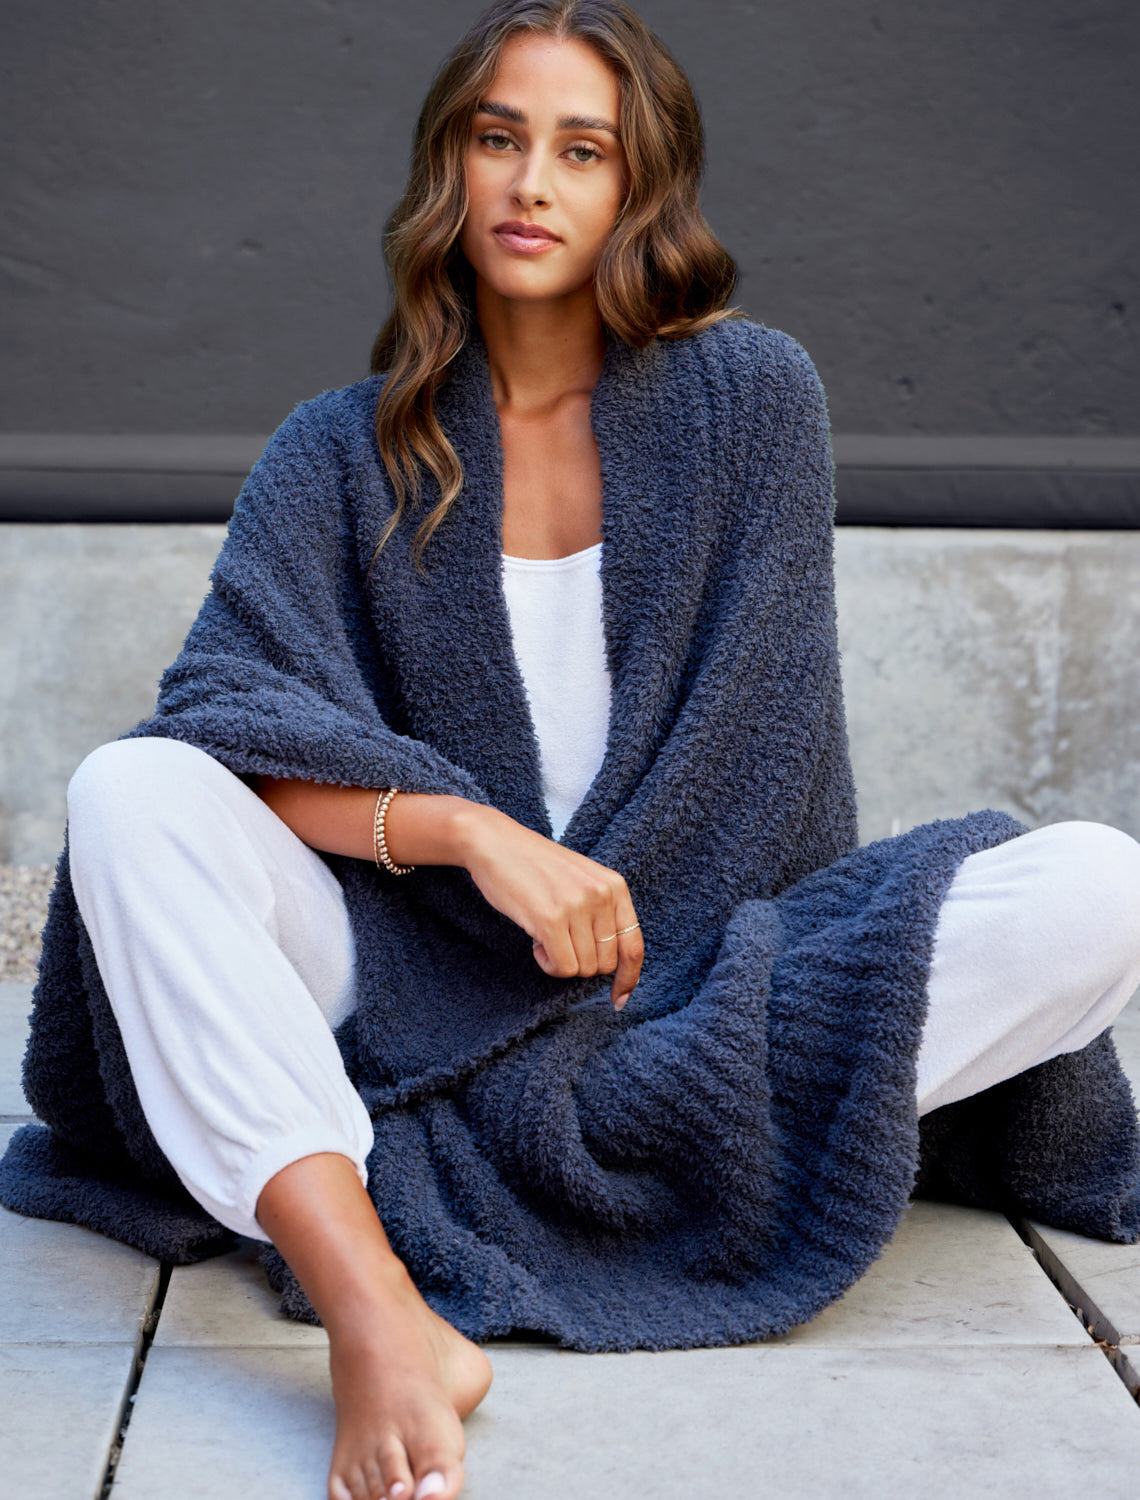  Barefoot Dreams CozyChic Ribbed Throw Slate Blue One